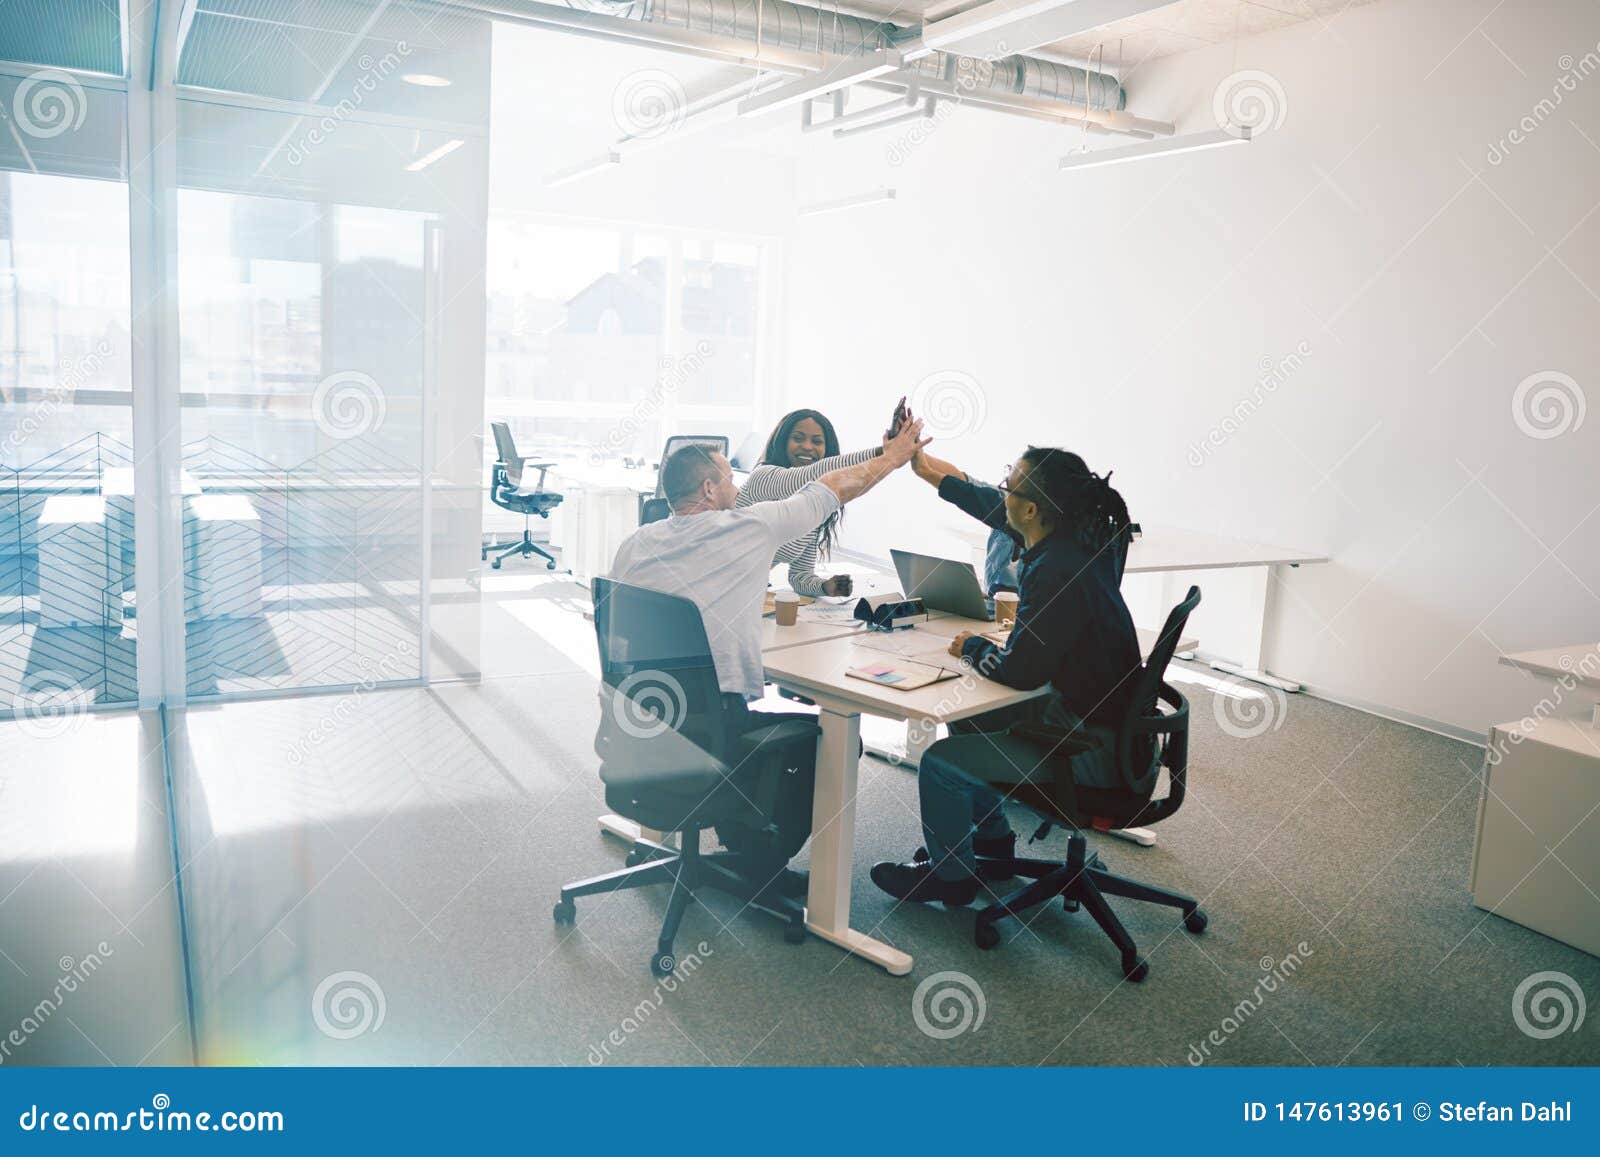 work colleagues laughing and high fiving during an office meetin